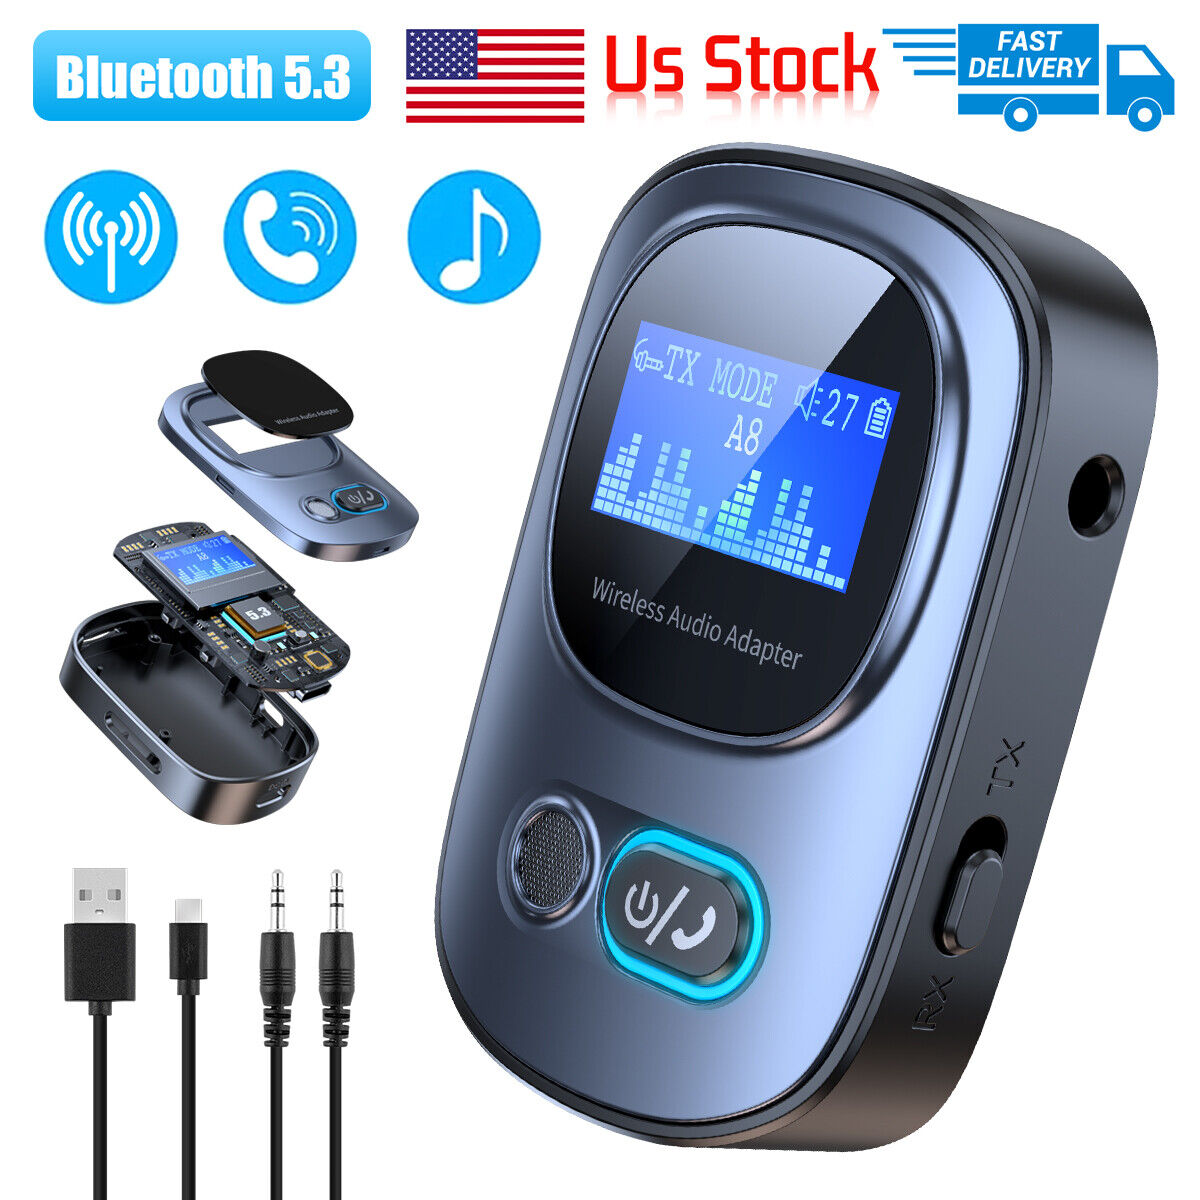 Portable Bluetooth 5.3 USB Wireless Transmitter Receiver Audio Adapter 3.5mm Aux